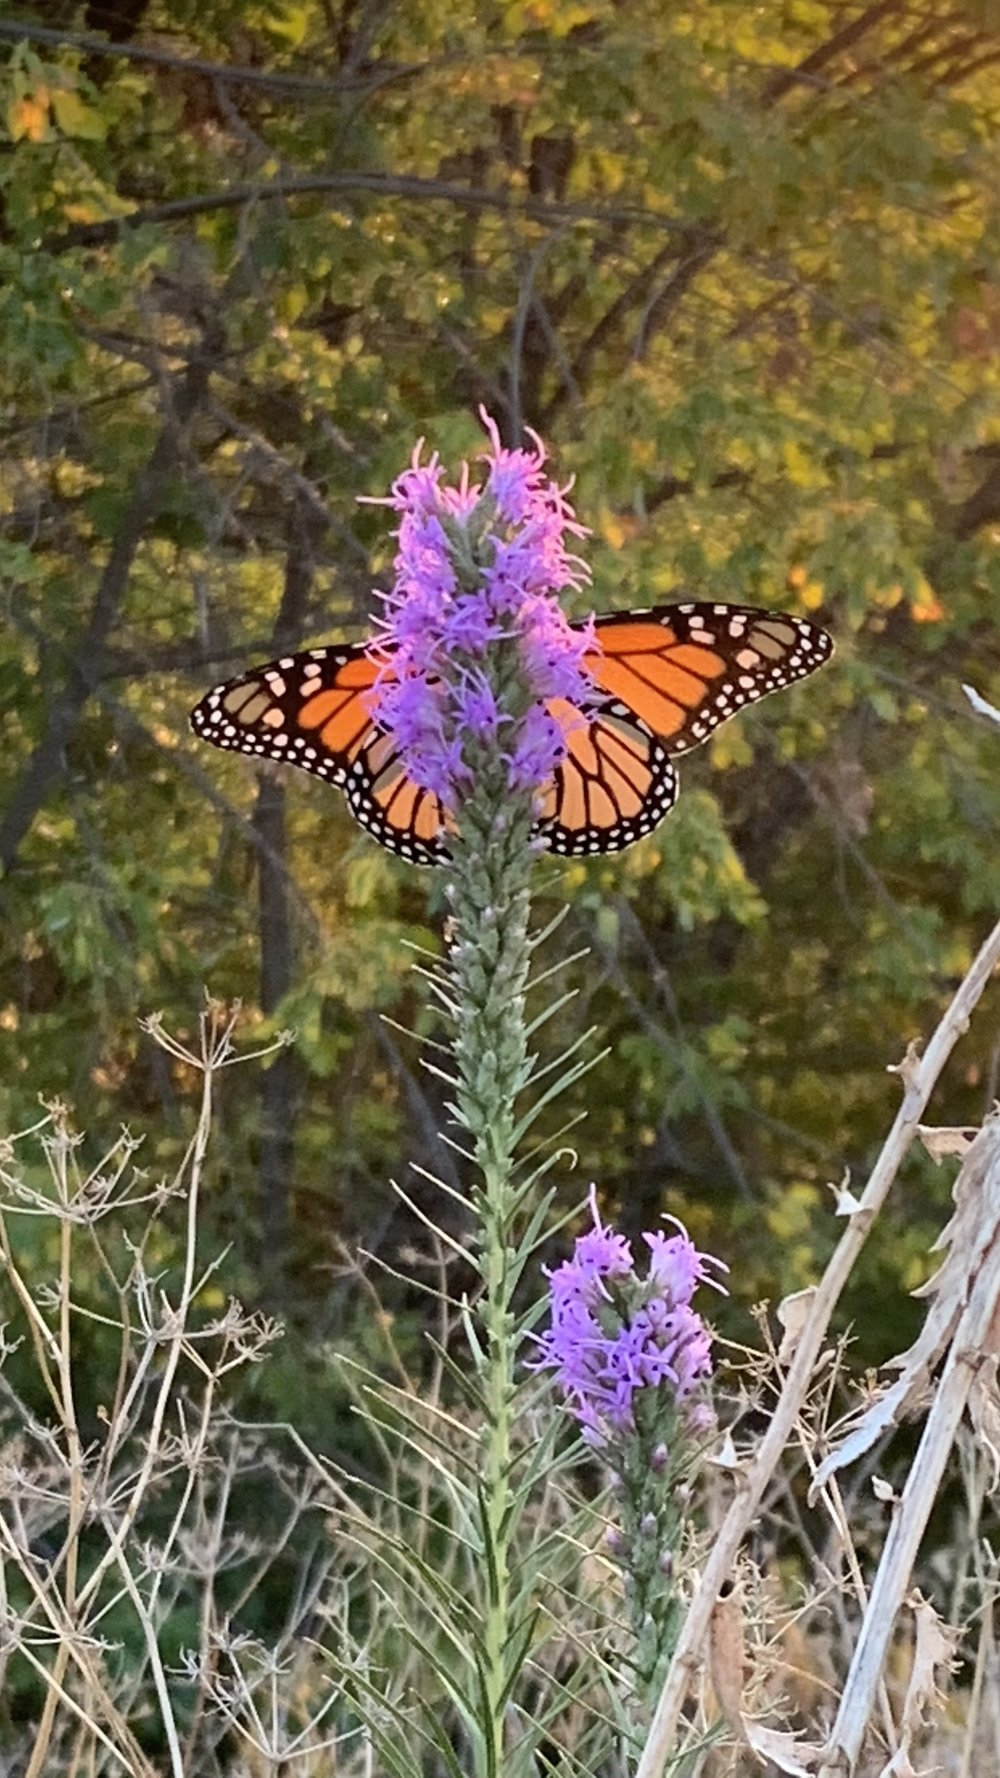   Who says orange and purple don’t go together??? MonarchButterfly  ( Danaus plexippus ) and  Dotted Gayfeather  make a striking pair. 